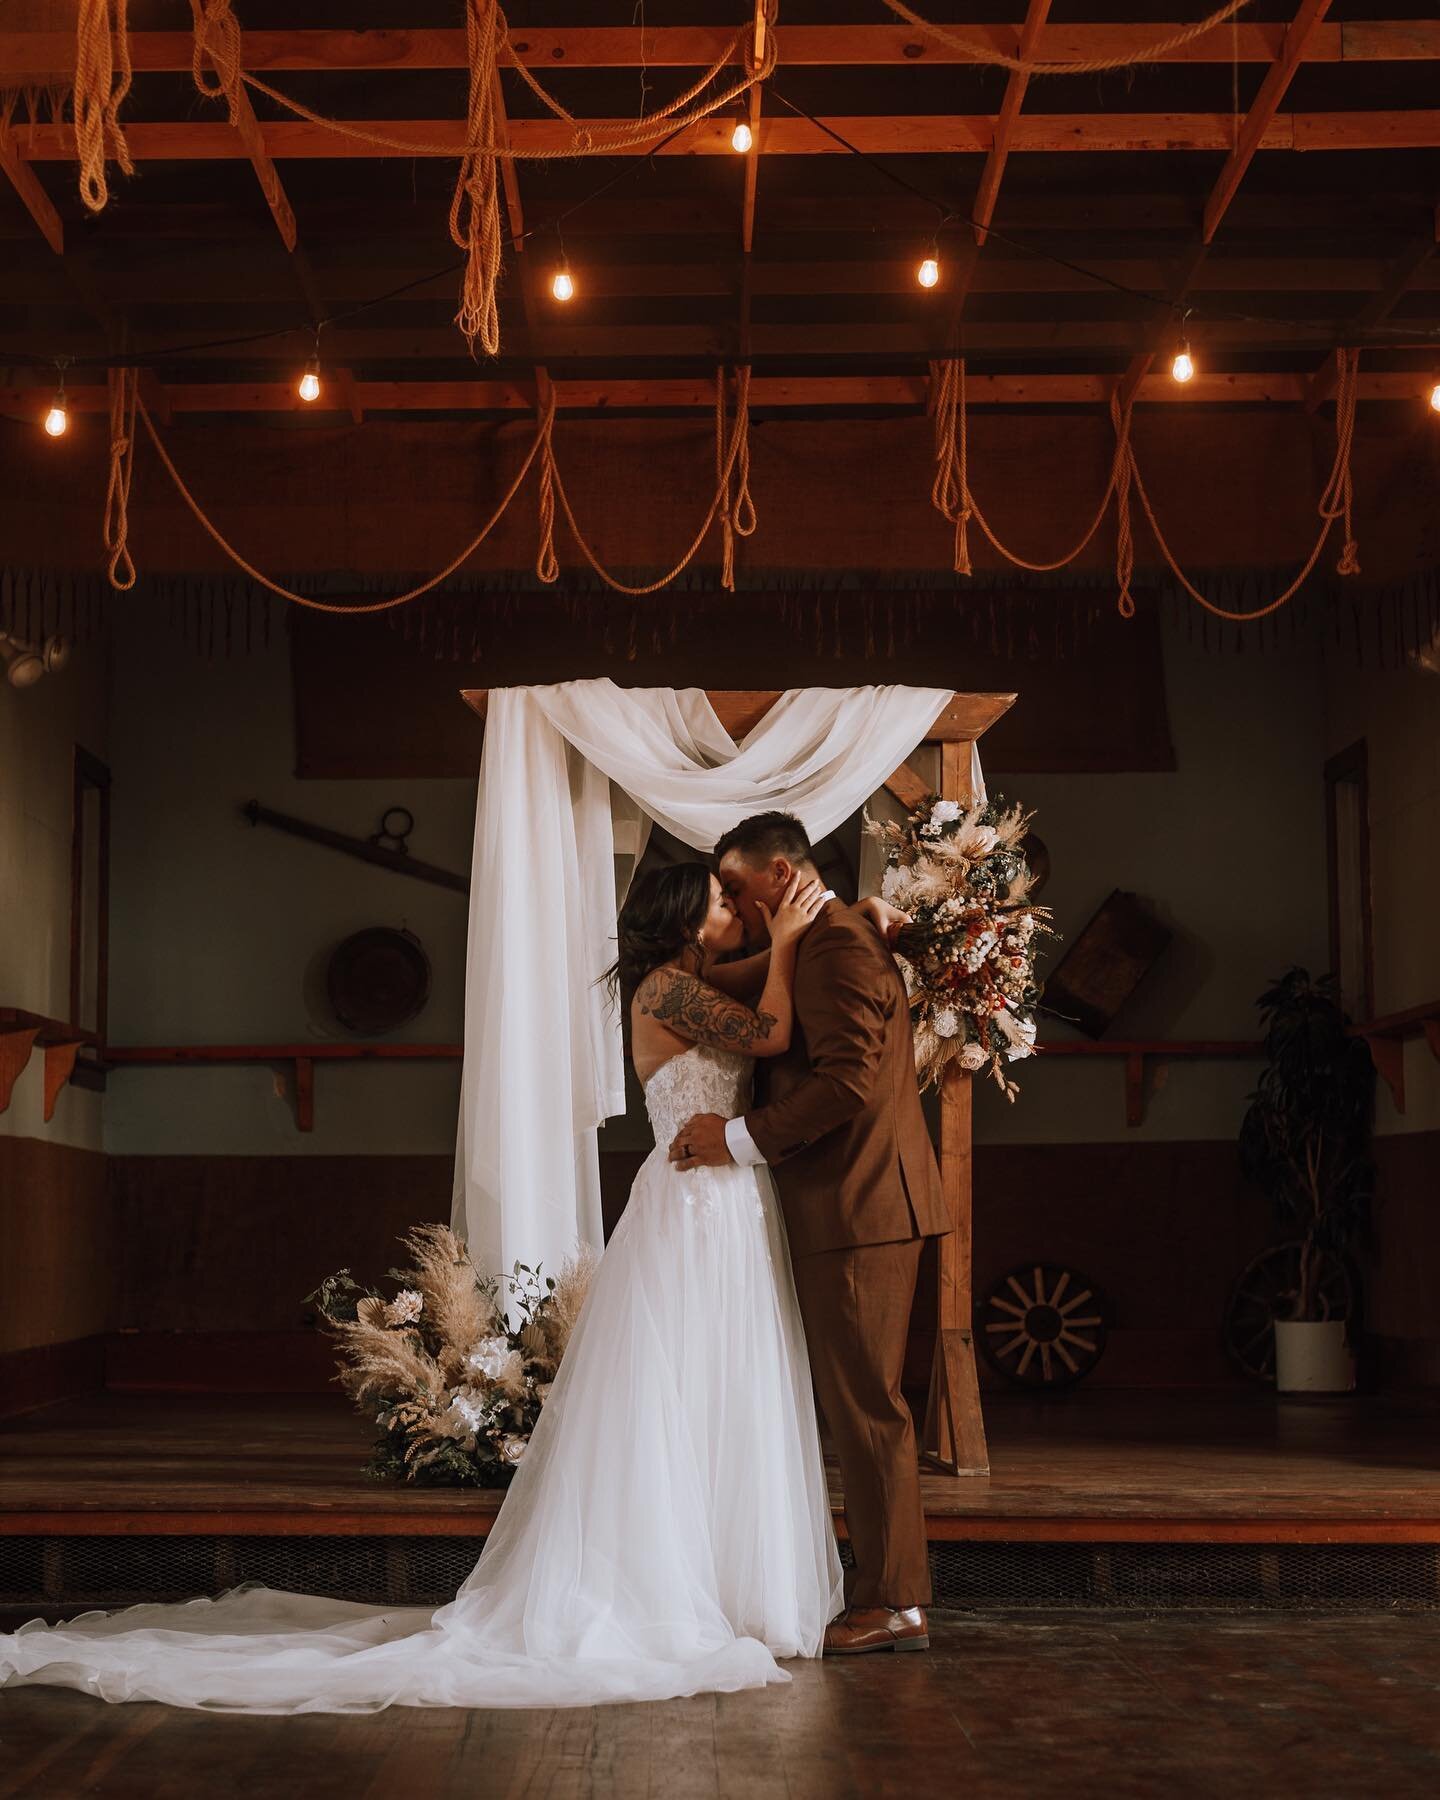 About yesterday 🥹 Kass and Mick - your wedding was a dream. It had some of the most touching moments I have witnessed all season and had the most beautiful details incorporated ❤️ thank you for including me in such a special day.